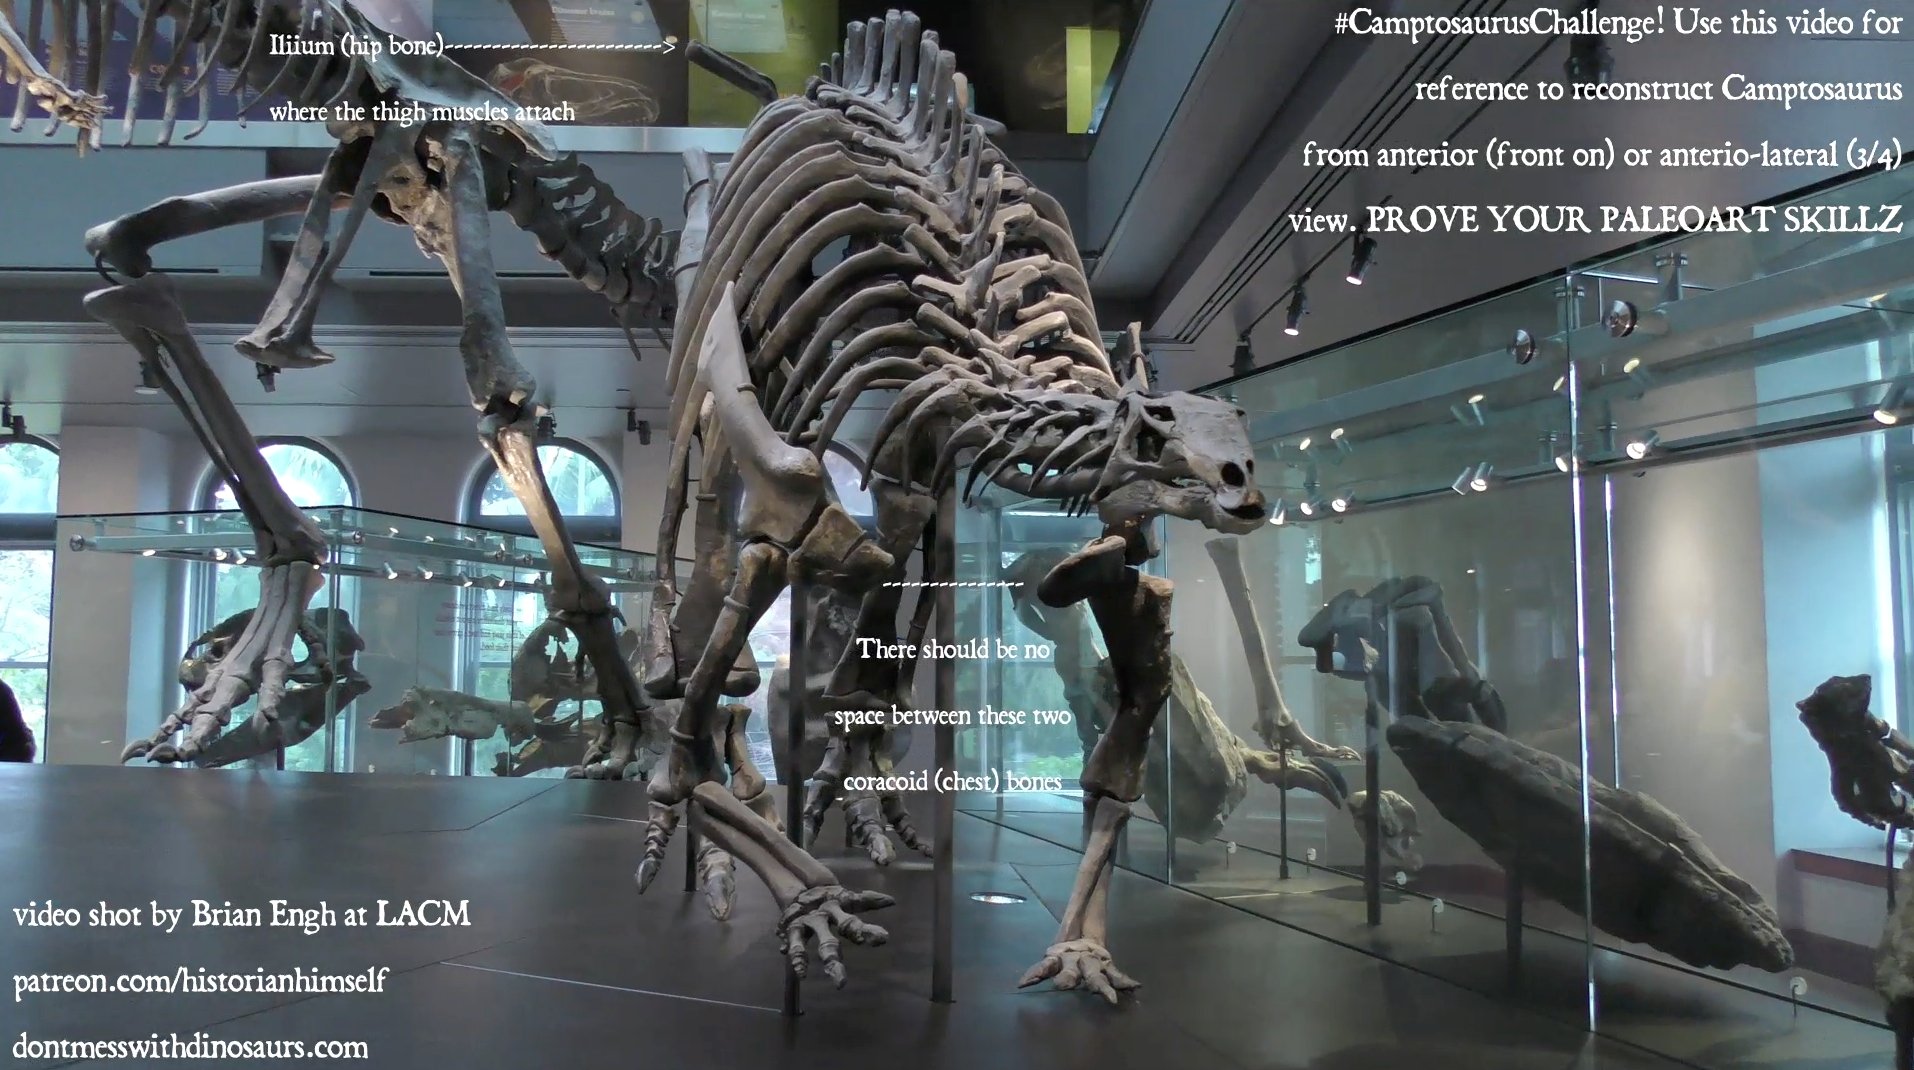 Brian Engh's "Camptosaurus Challenge" call to action